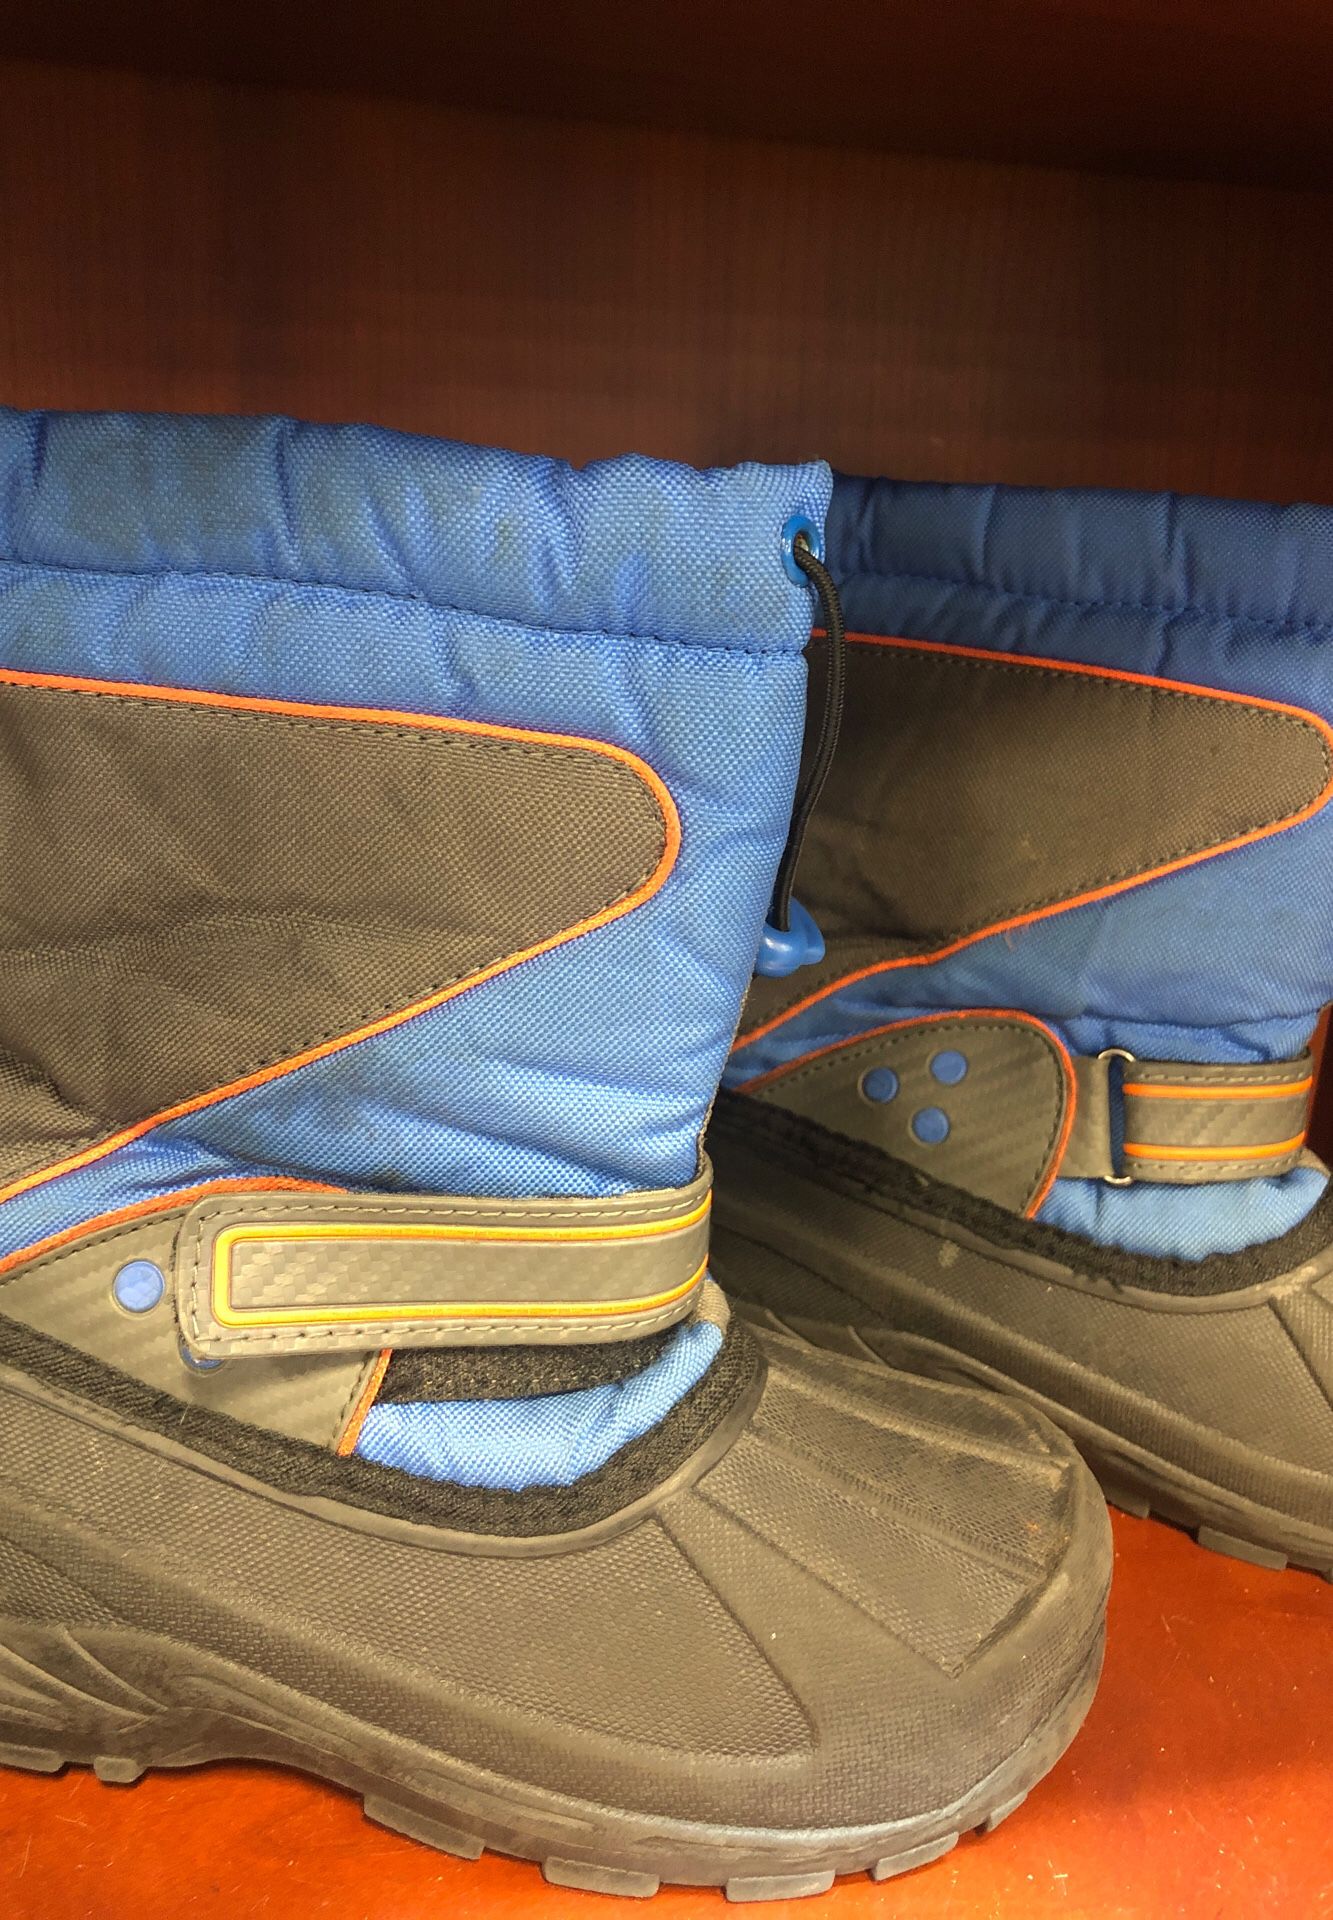 Snow boots size 2 for Boys or girl